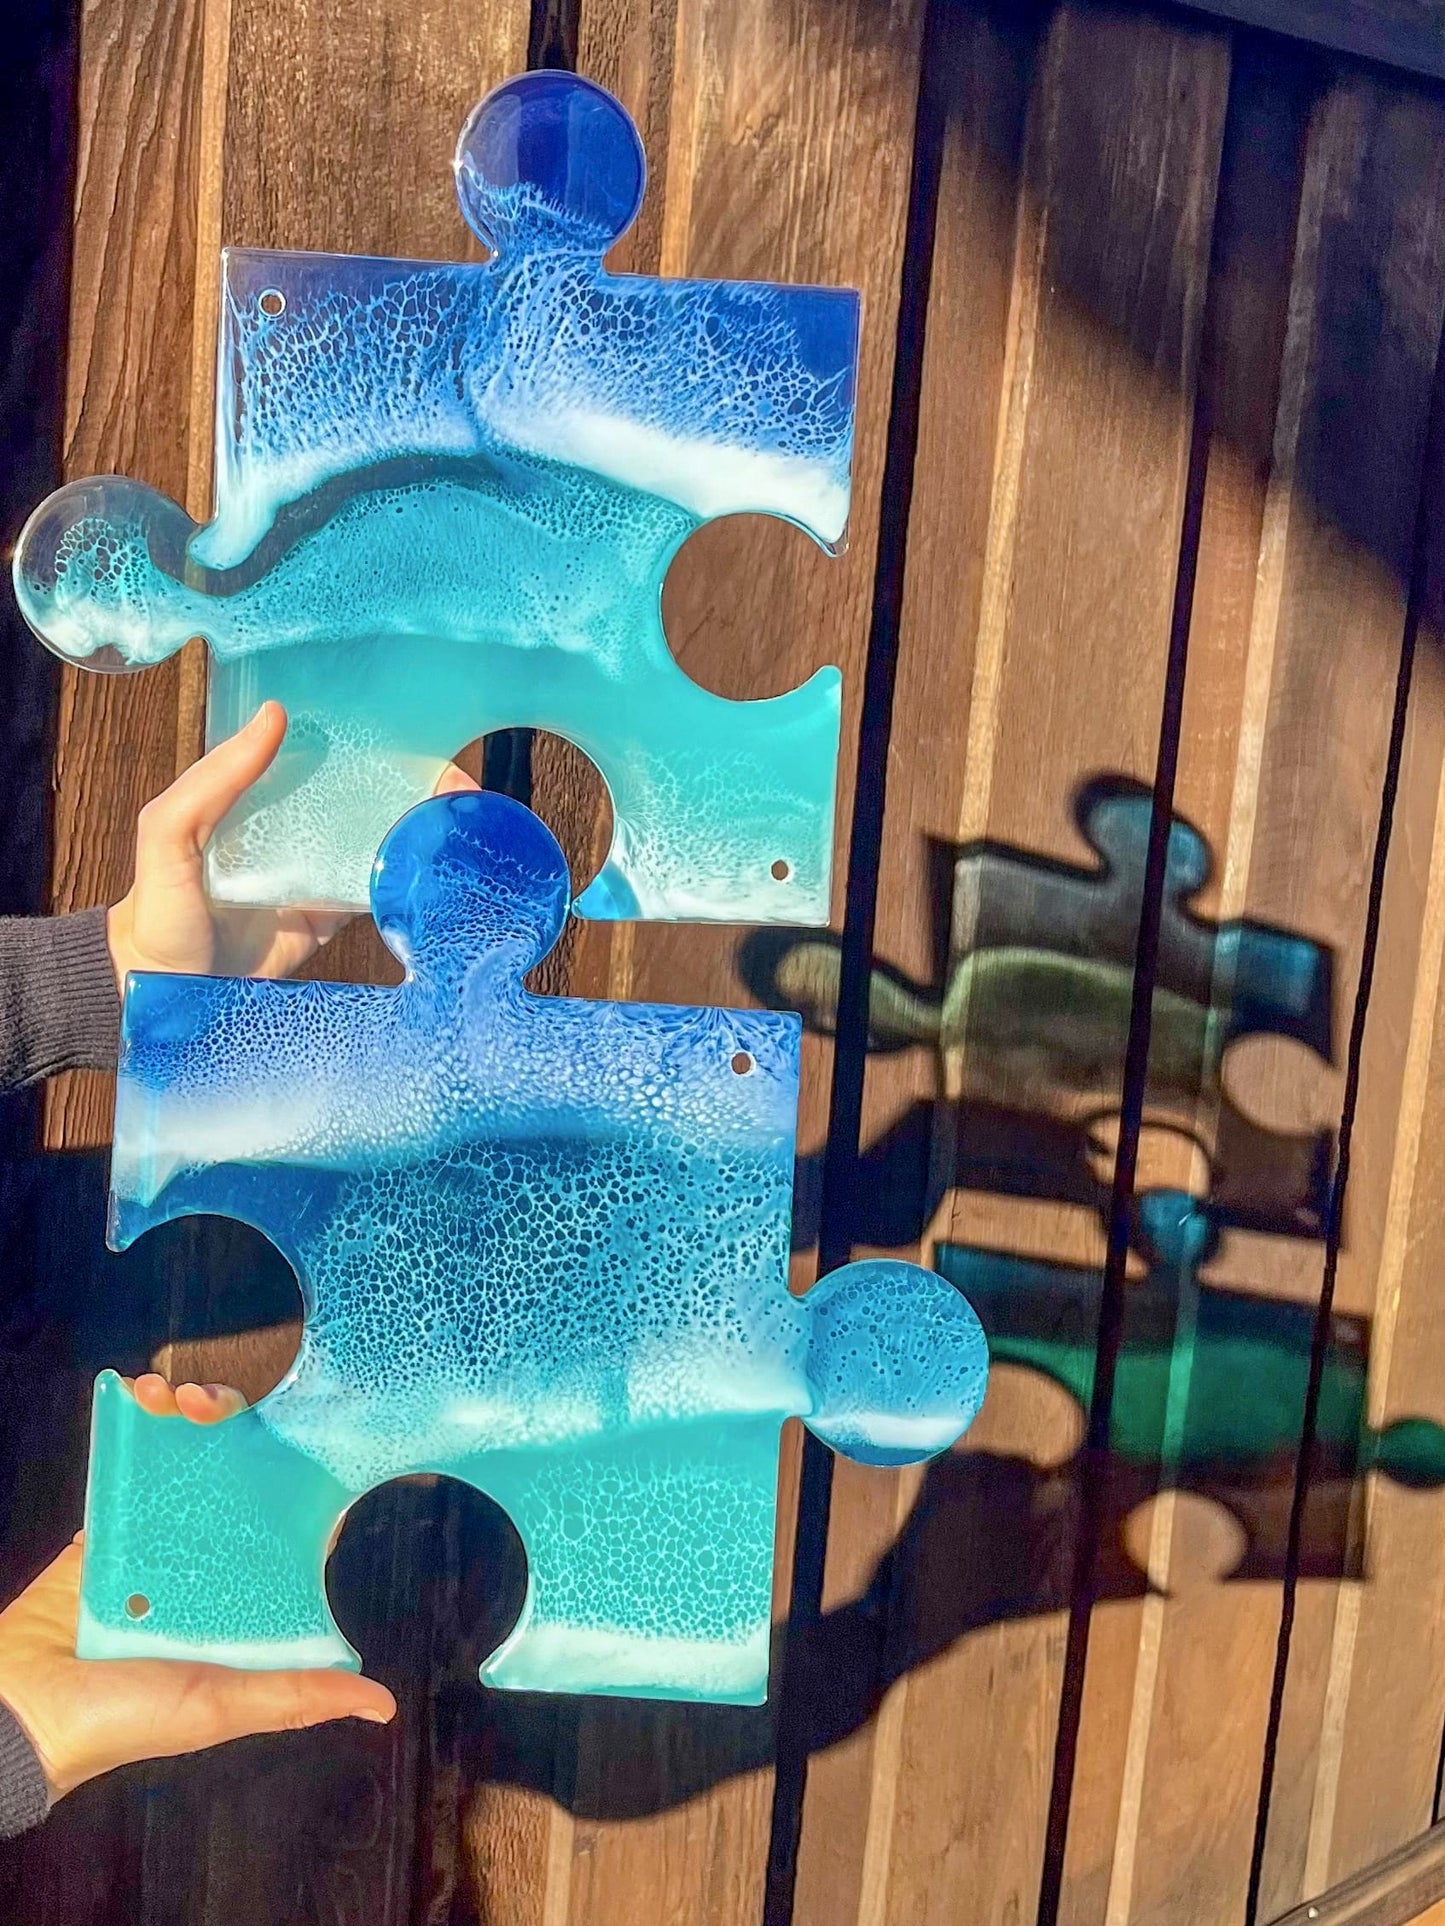 Woman holding resin ocean puzzle artwork against wall casting colorful blue shadows.